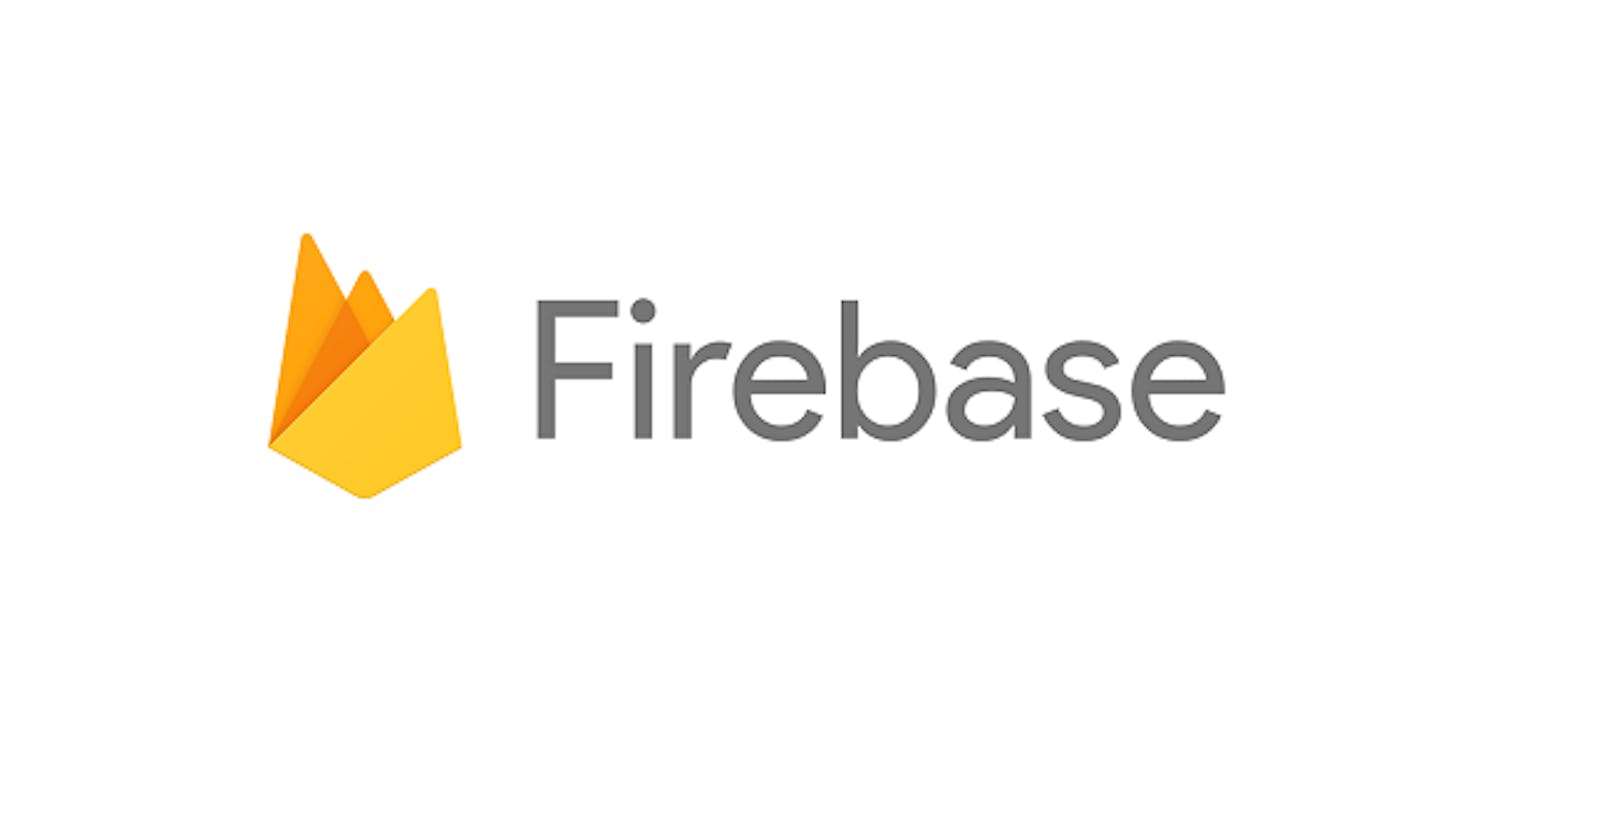 Deploy your react project on Firebase